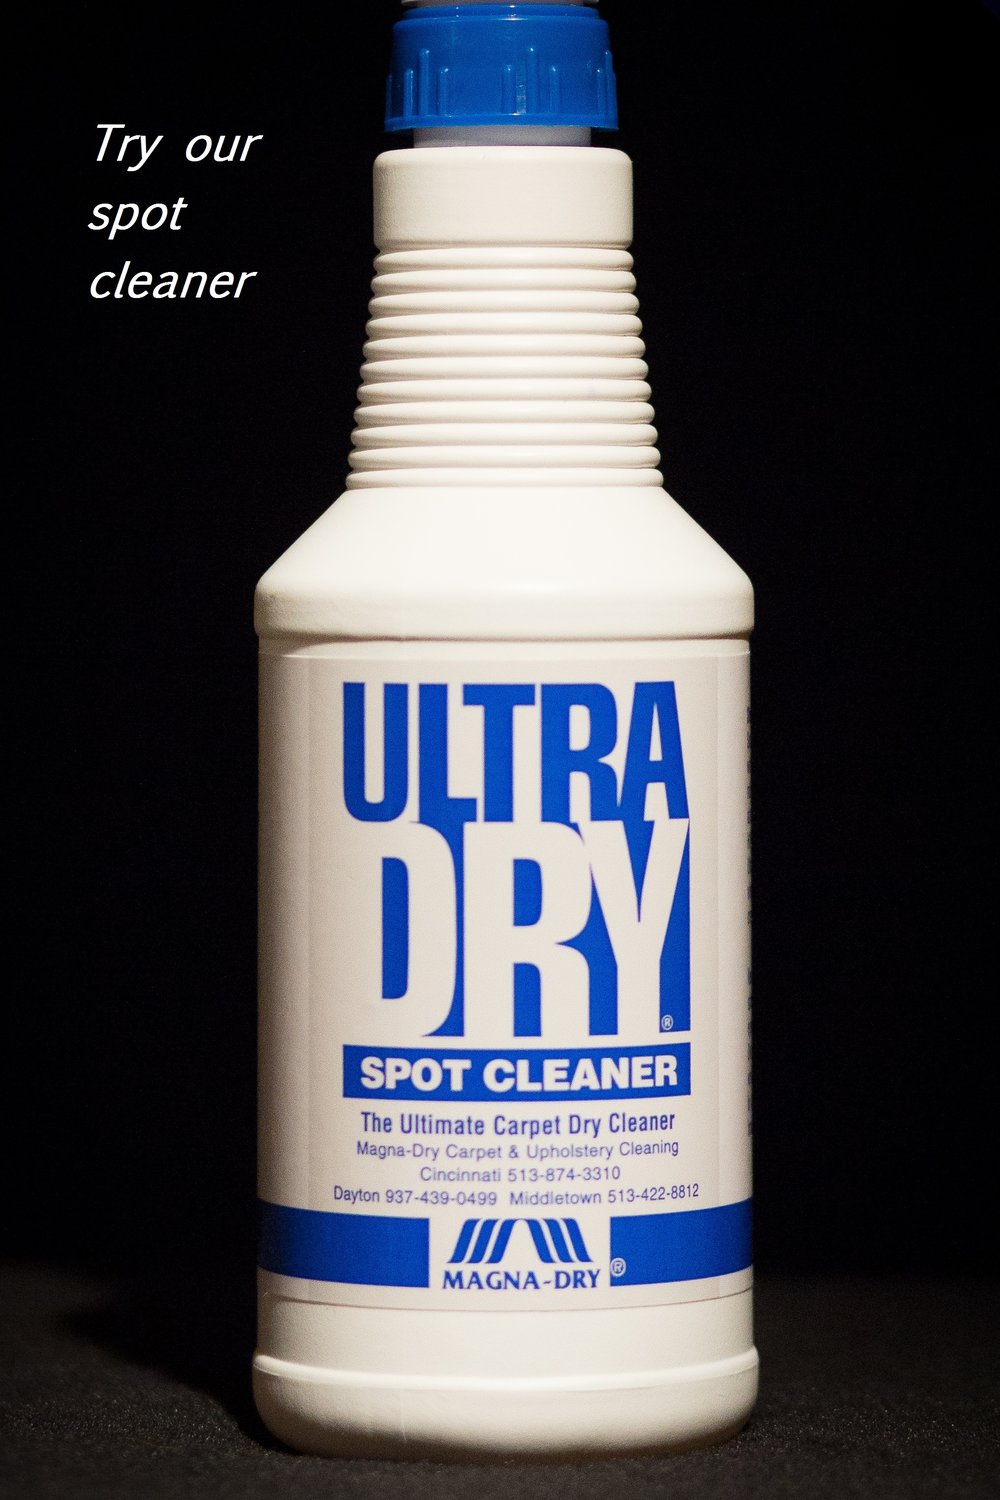 Magna-Dry Carpet and Upholstery Dry Cleaning — Ultra Dry spot